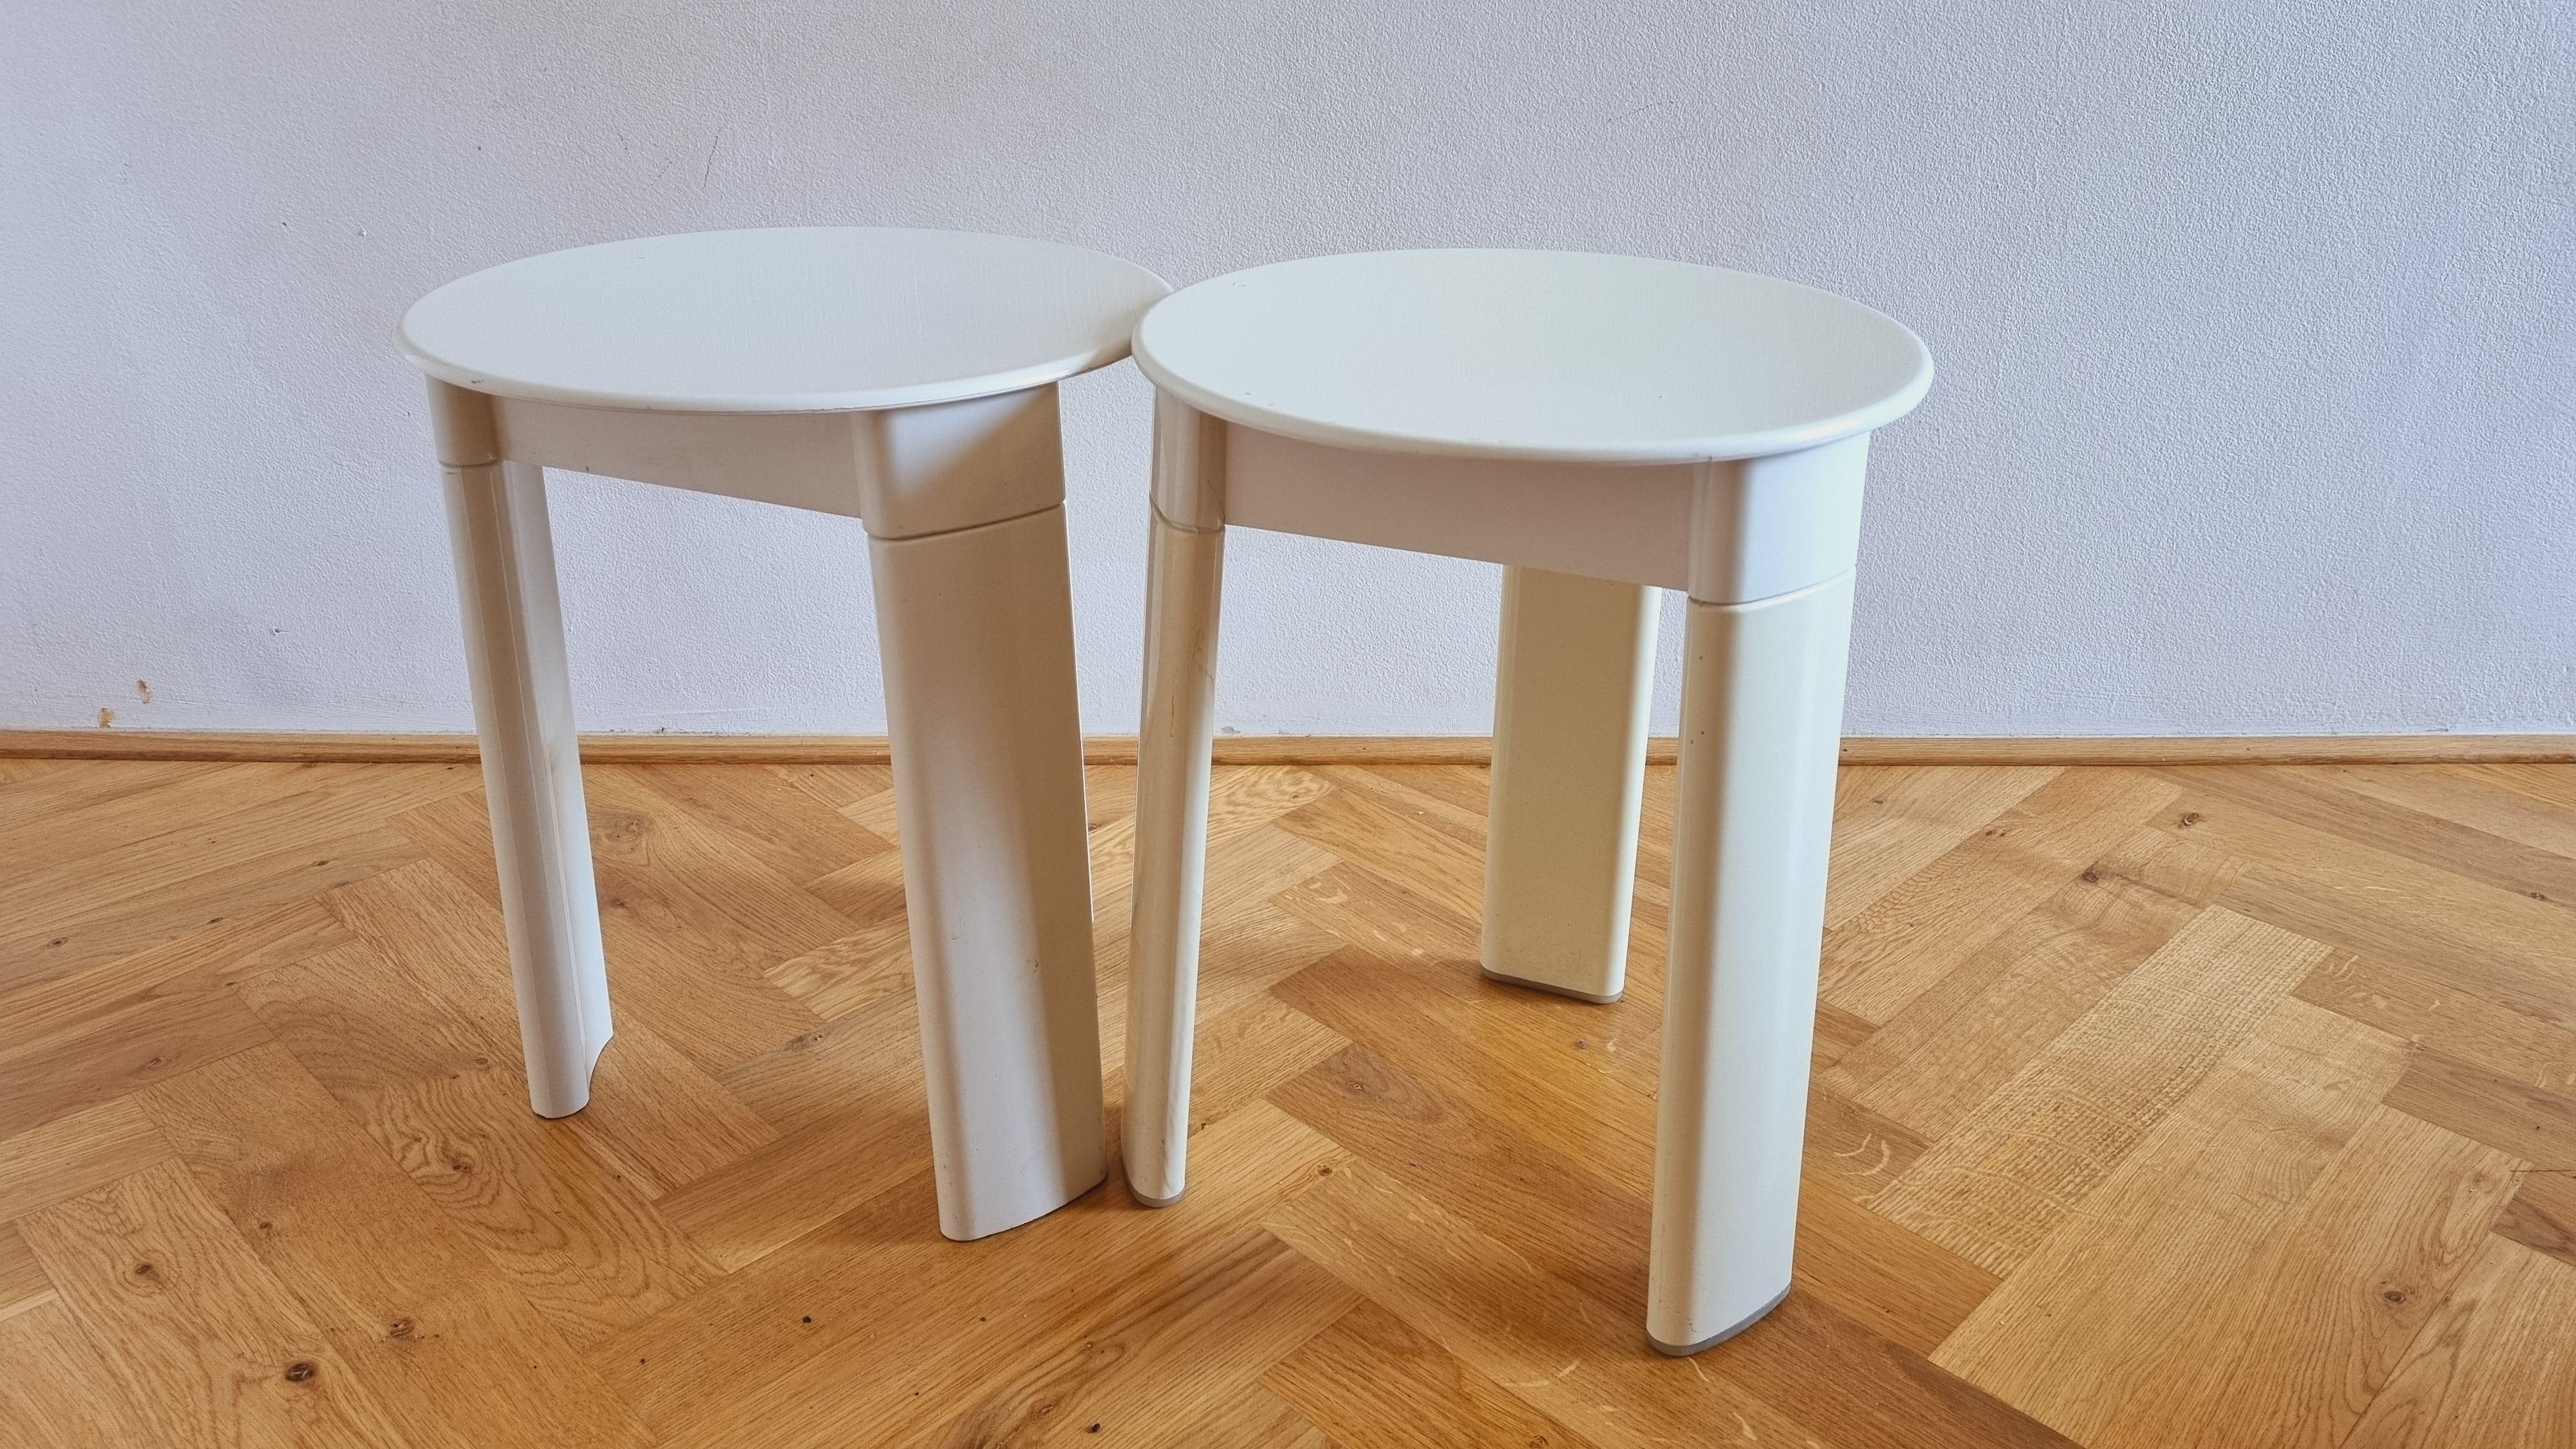 Italian Pair of Midcentury Stools or Side Tables Trio, Olaf Von Bohr, Gedy, Italy, 1970s For Sale